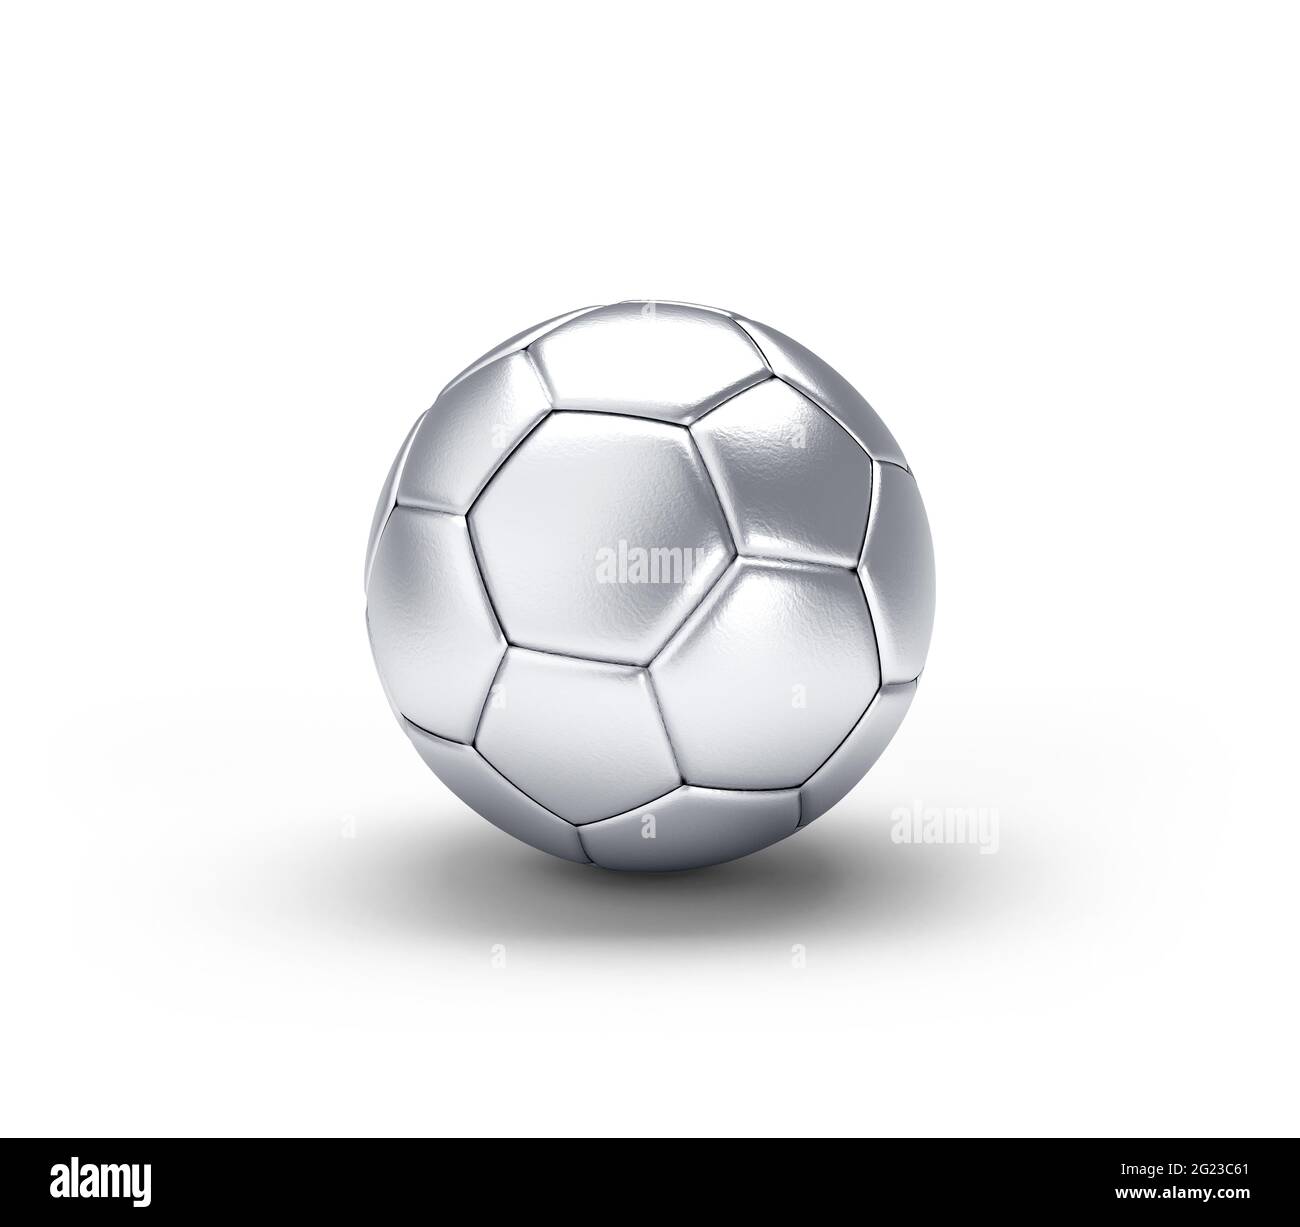 Silver soccer ball isolated on white background. 3D illustration. Stock Photo